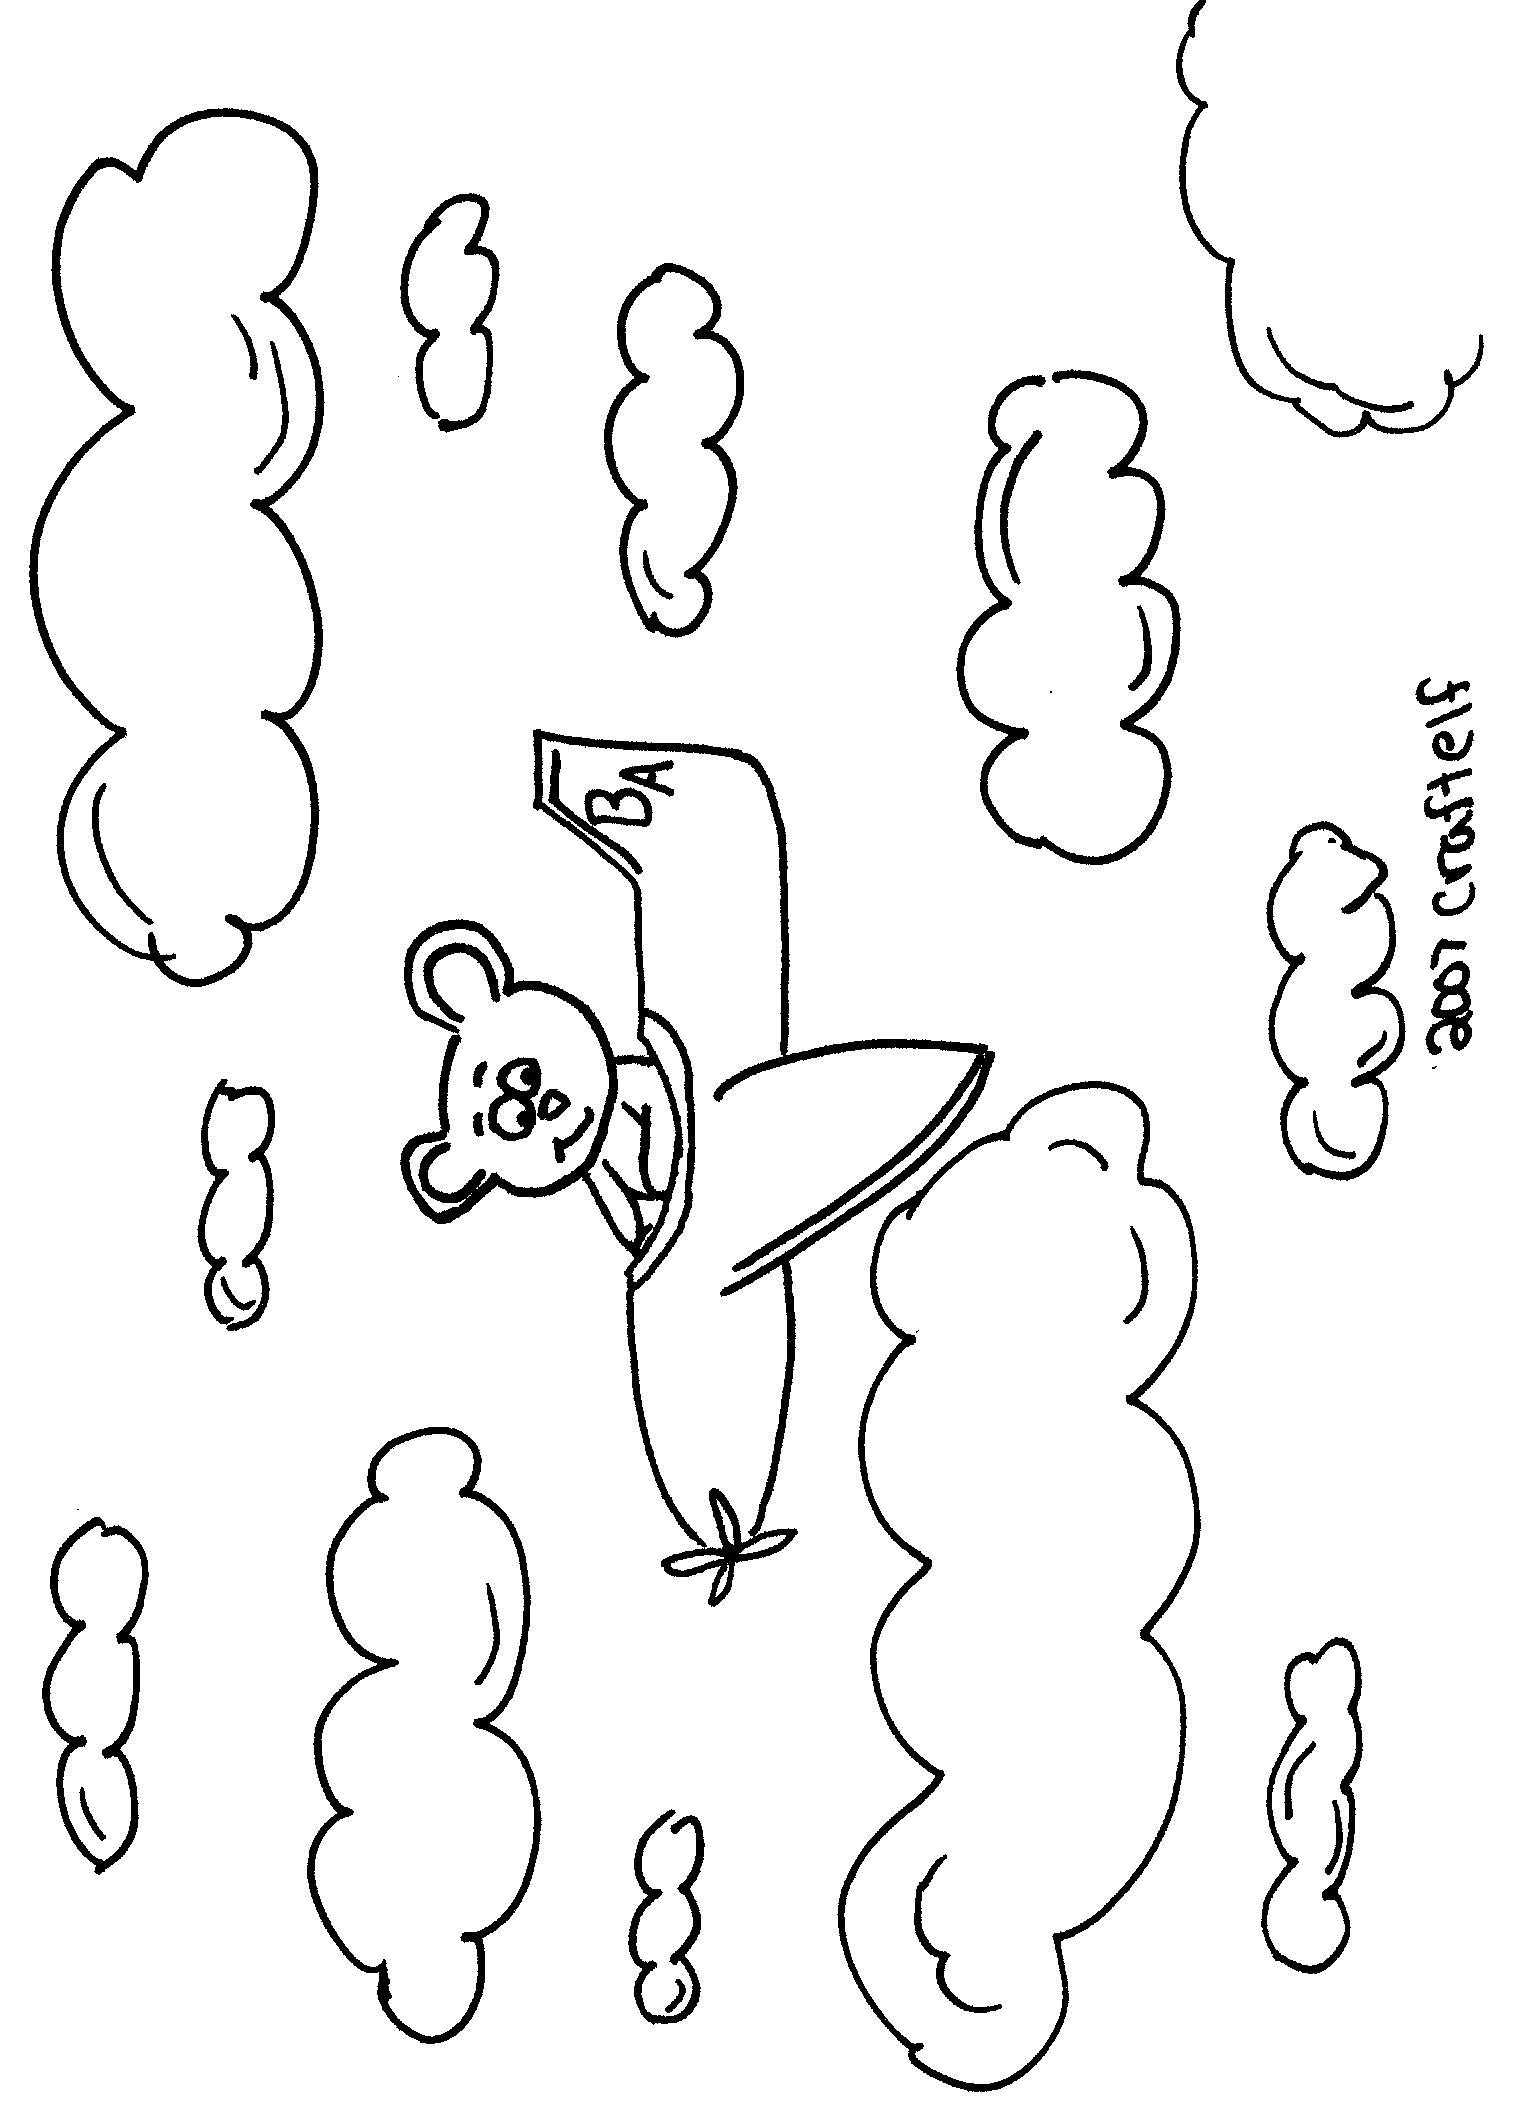 Free Coloring Pages - Airplane Bear & crafts